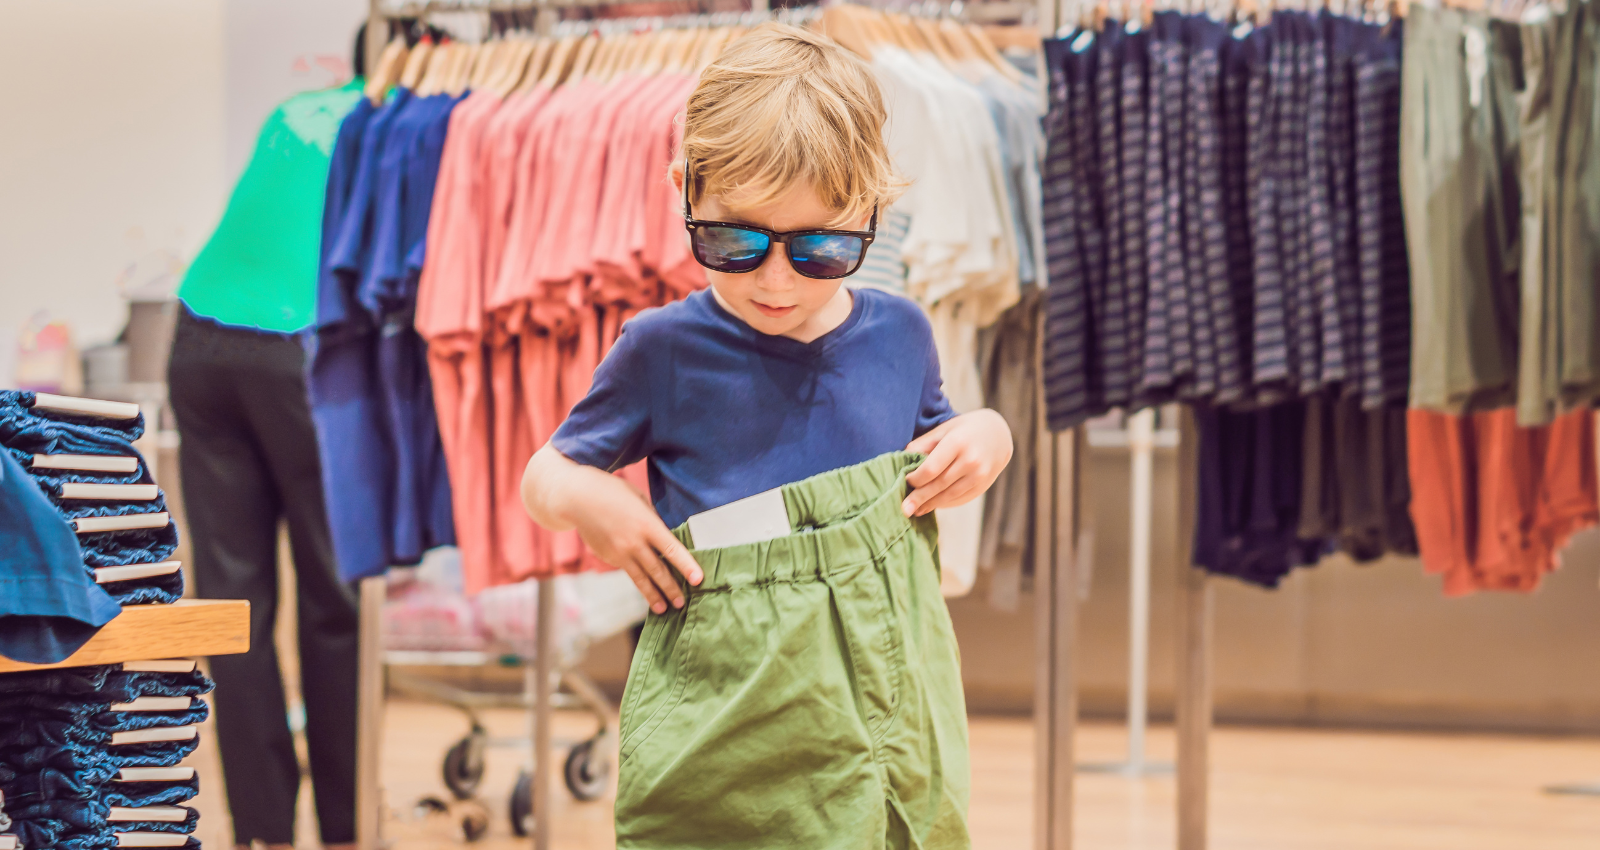 Things to consider when buying clothing for children with autism